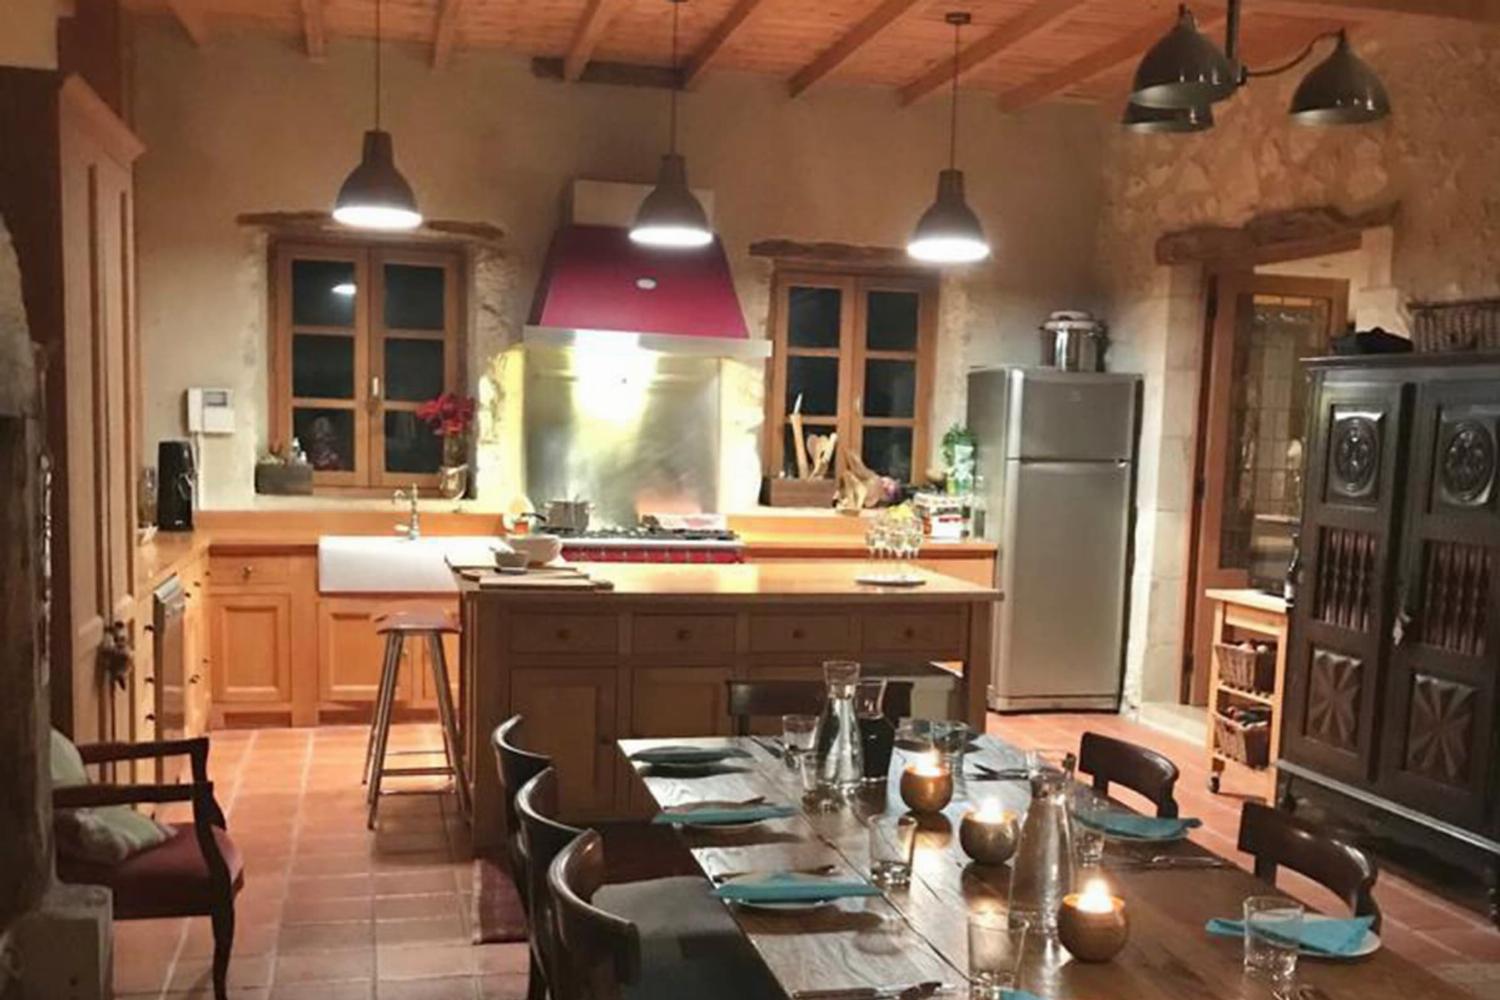 Kitchen | Holiday home in South West France